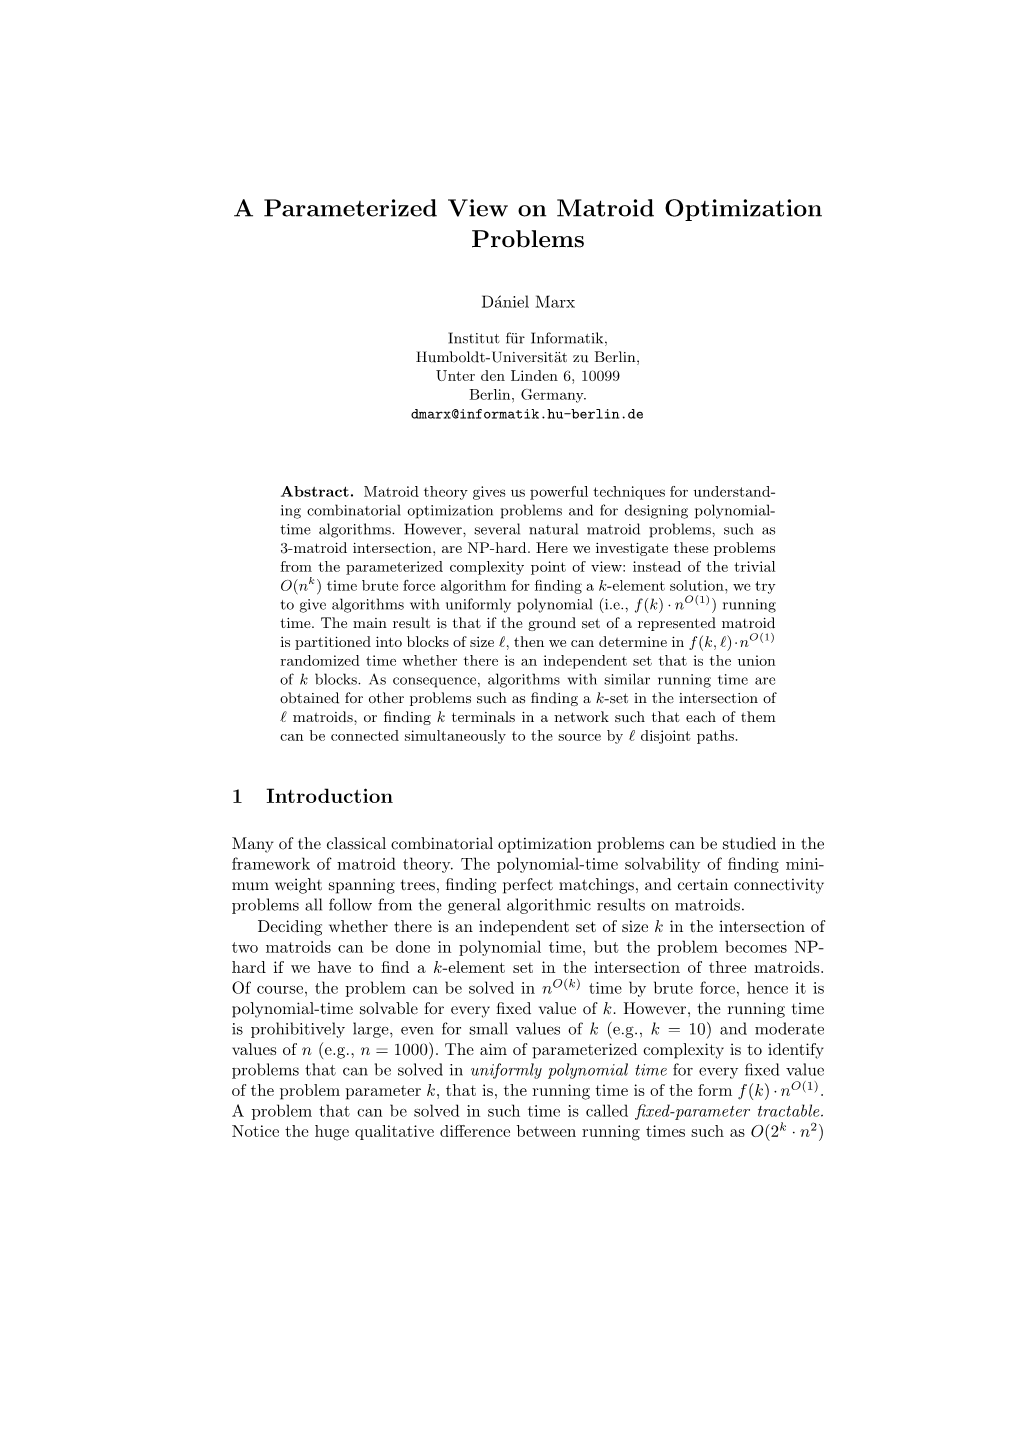 A Parameterized View on Matroid Optimization Problems